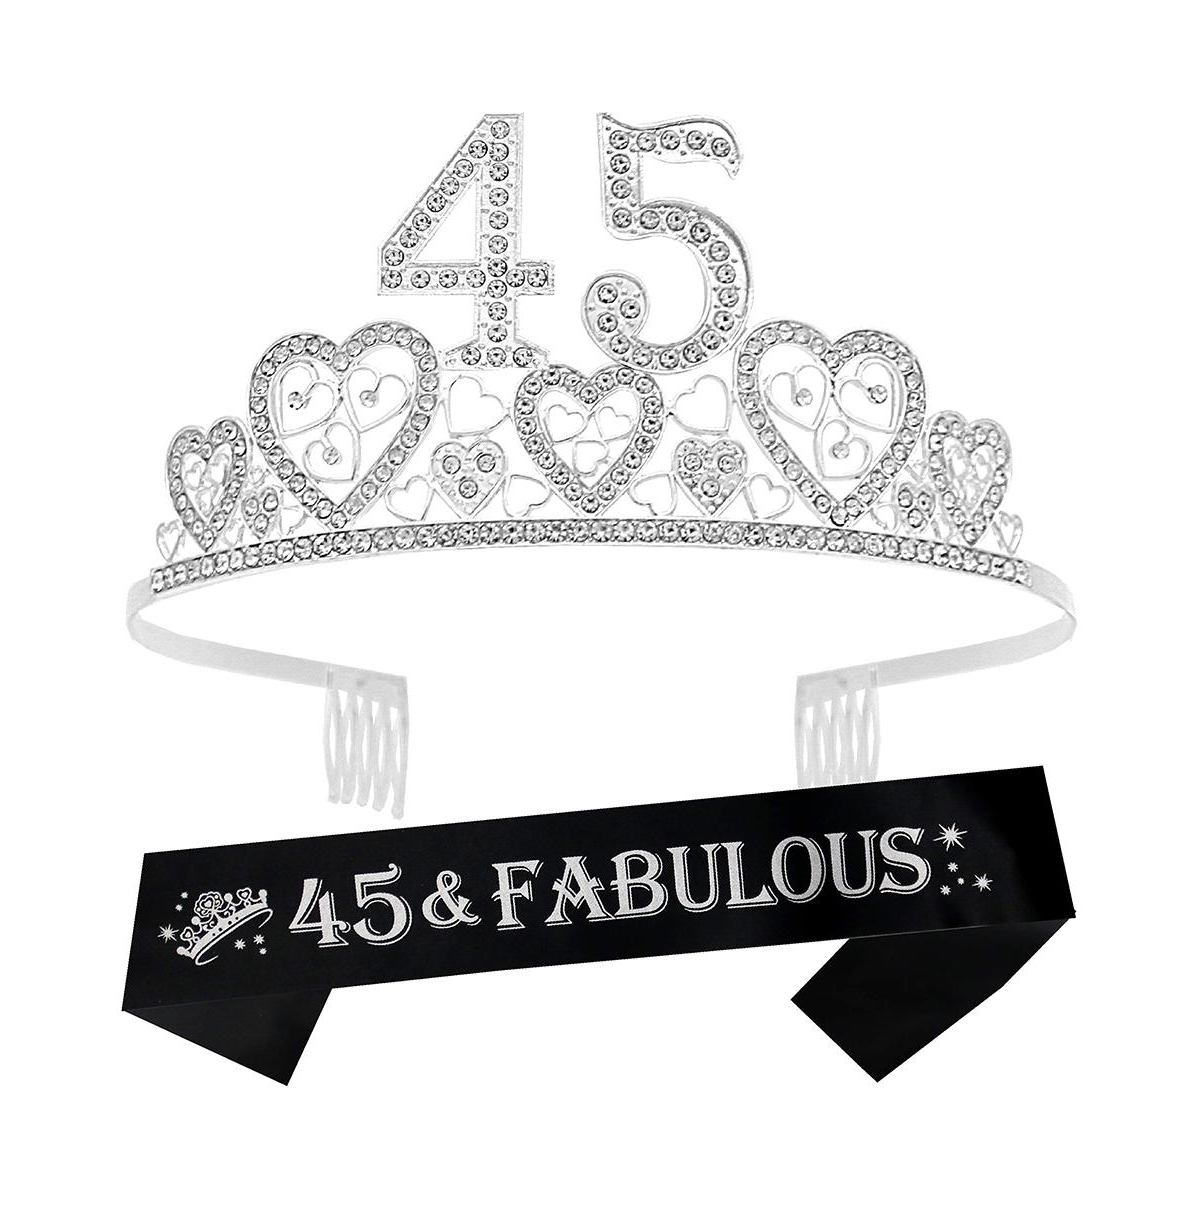 45th Birthday Sash and Tiara Set for Women - Glittery Sash with Hearts and Silver Rhinestone Metal Tiara, Perfect 45th Birthday Party Gifts and Access